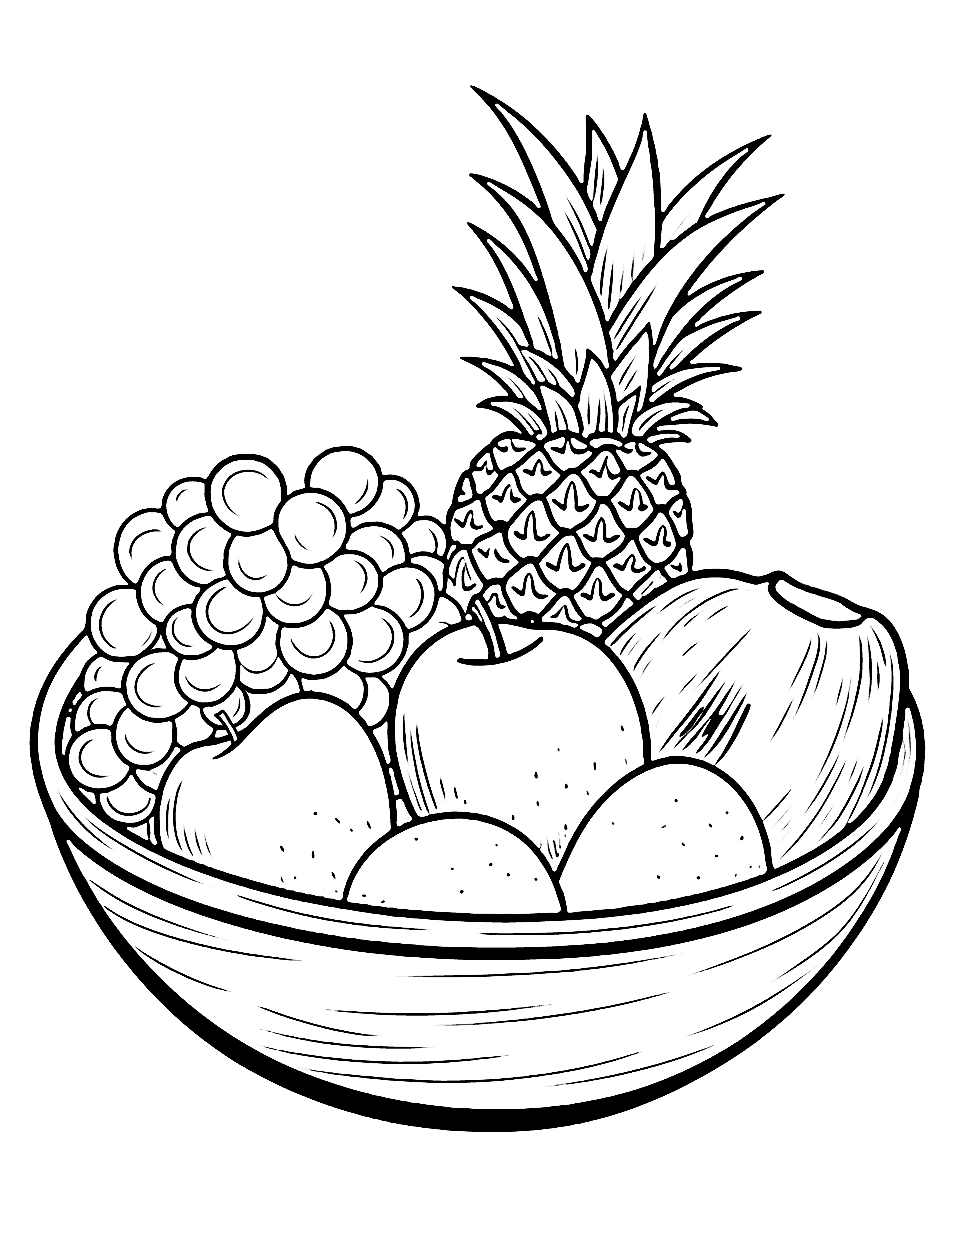 Fruit Bowl Fiesta Coloring Page - A large bowl filled with a variety of fruits.